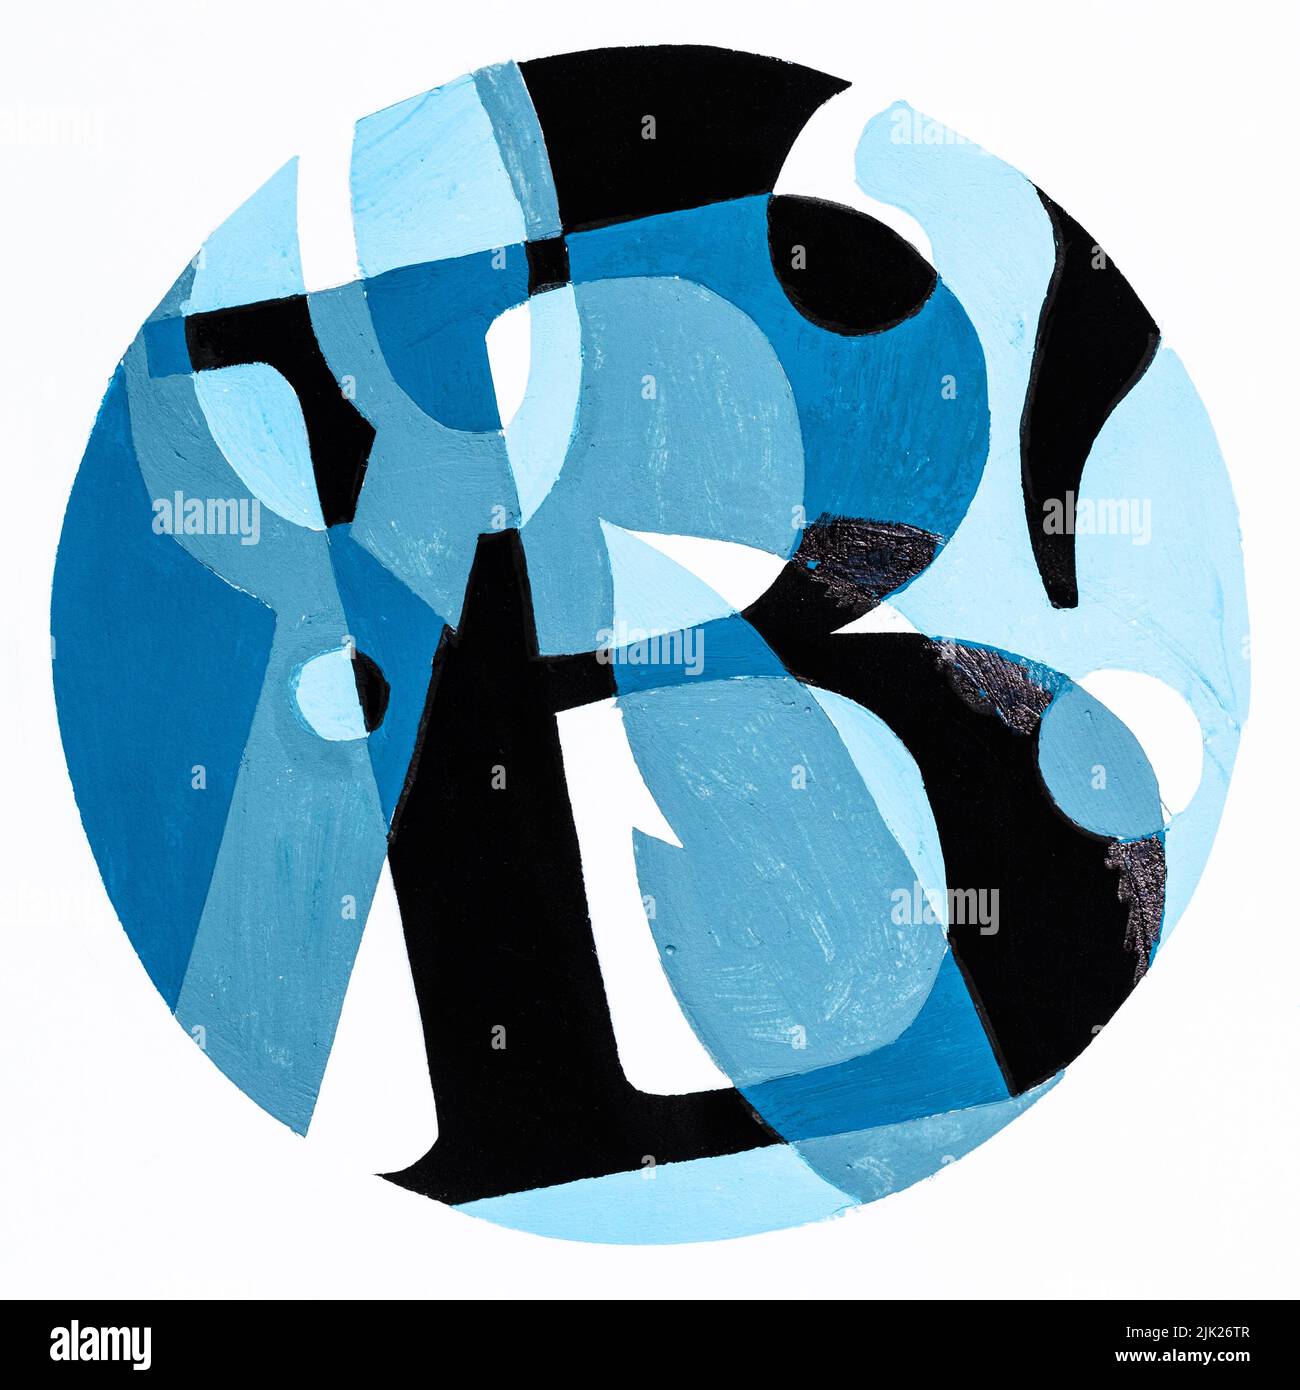 abstract round composition with letter B, tree leaf , scissors and question mark hand-painted with blue and black tempera paints on white paper Stock Photo